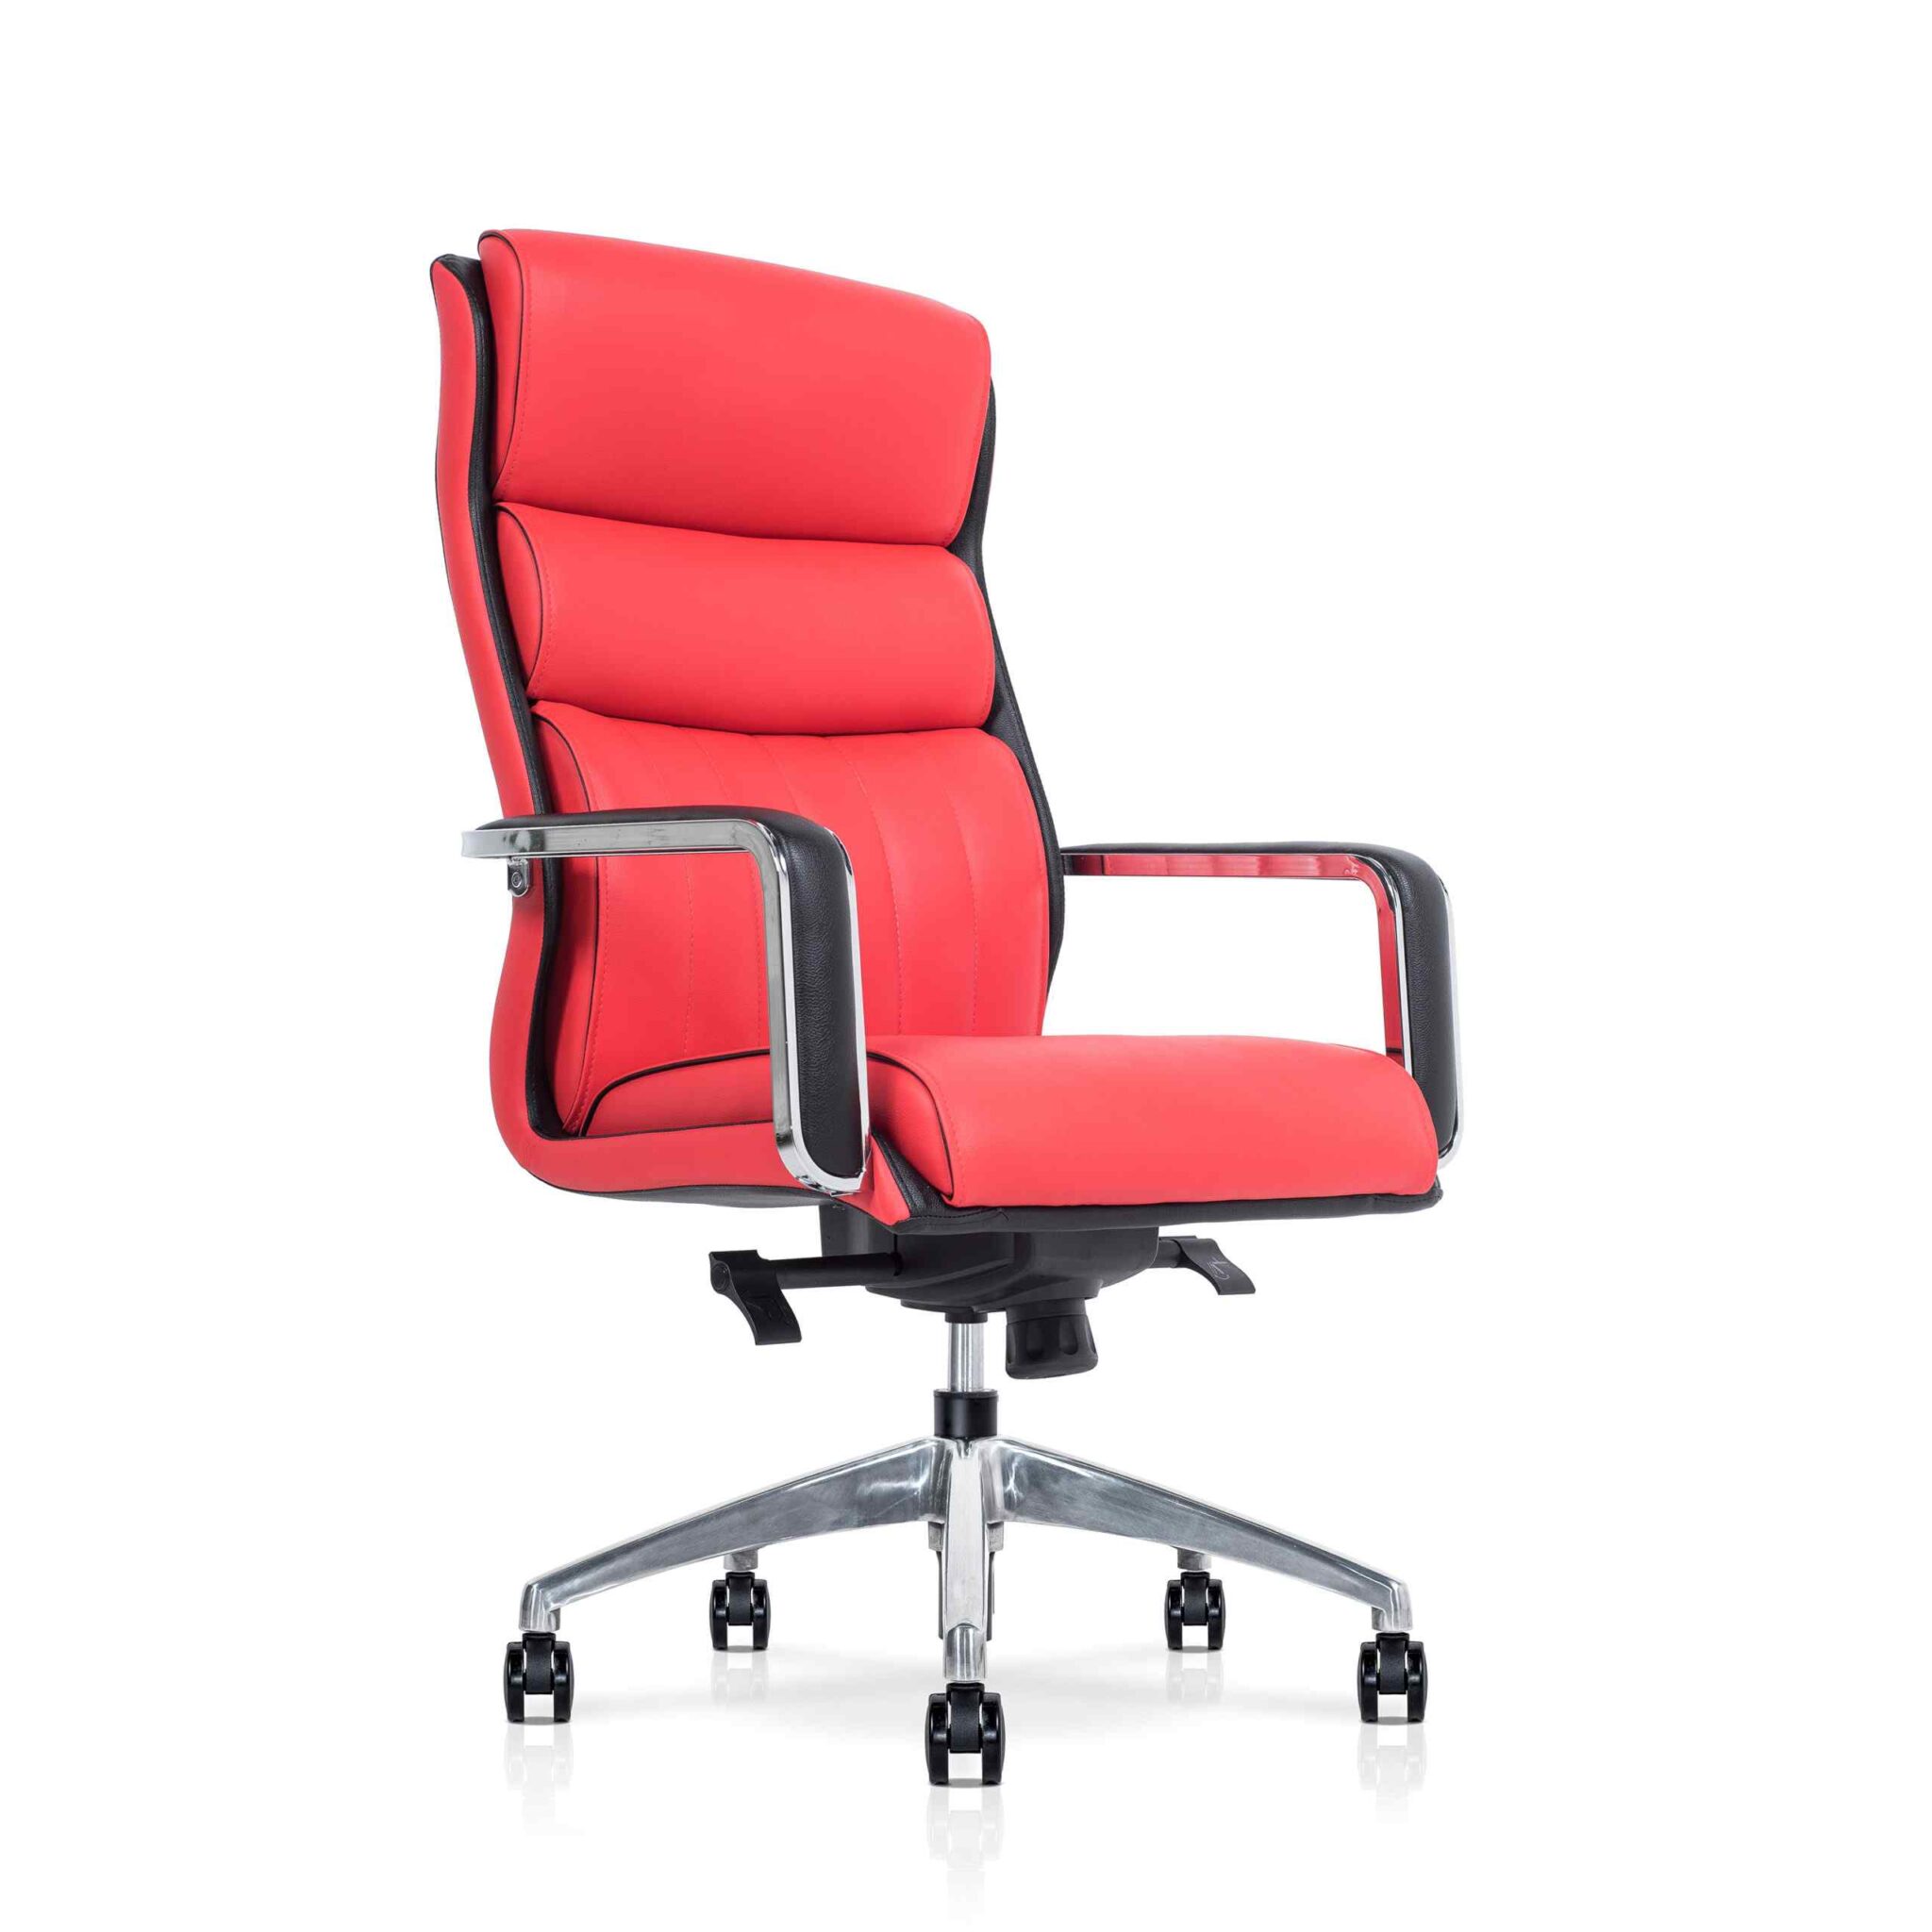 Full Office Leather Chair